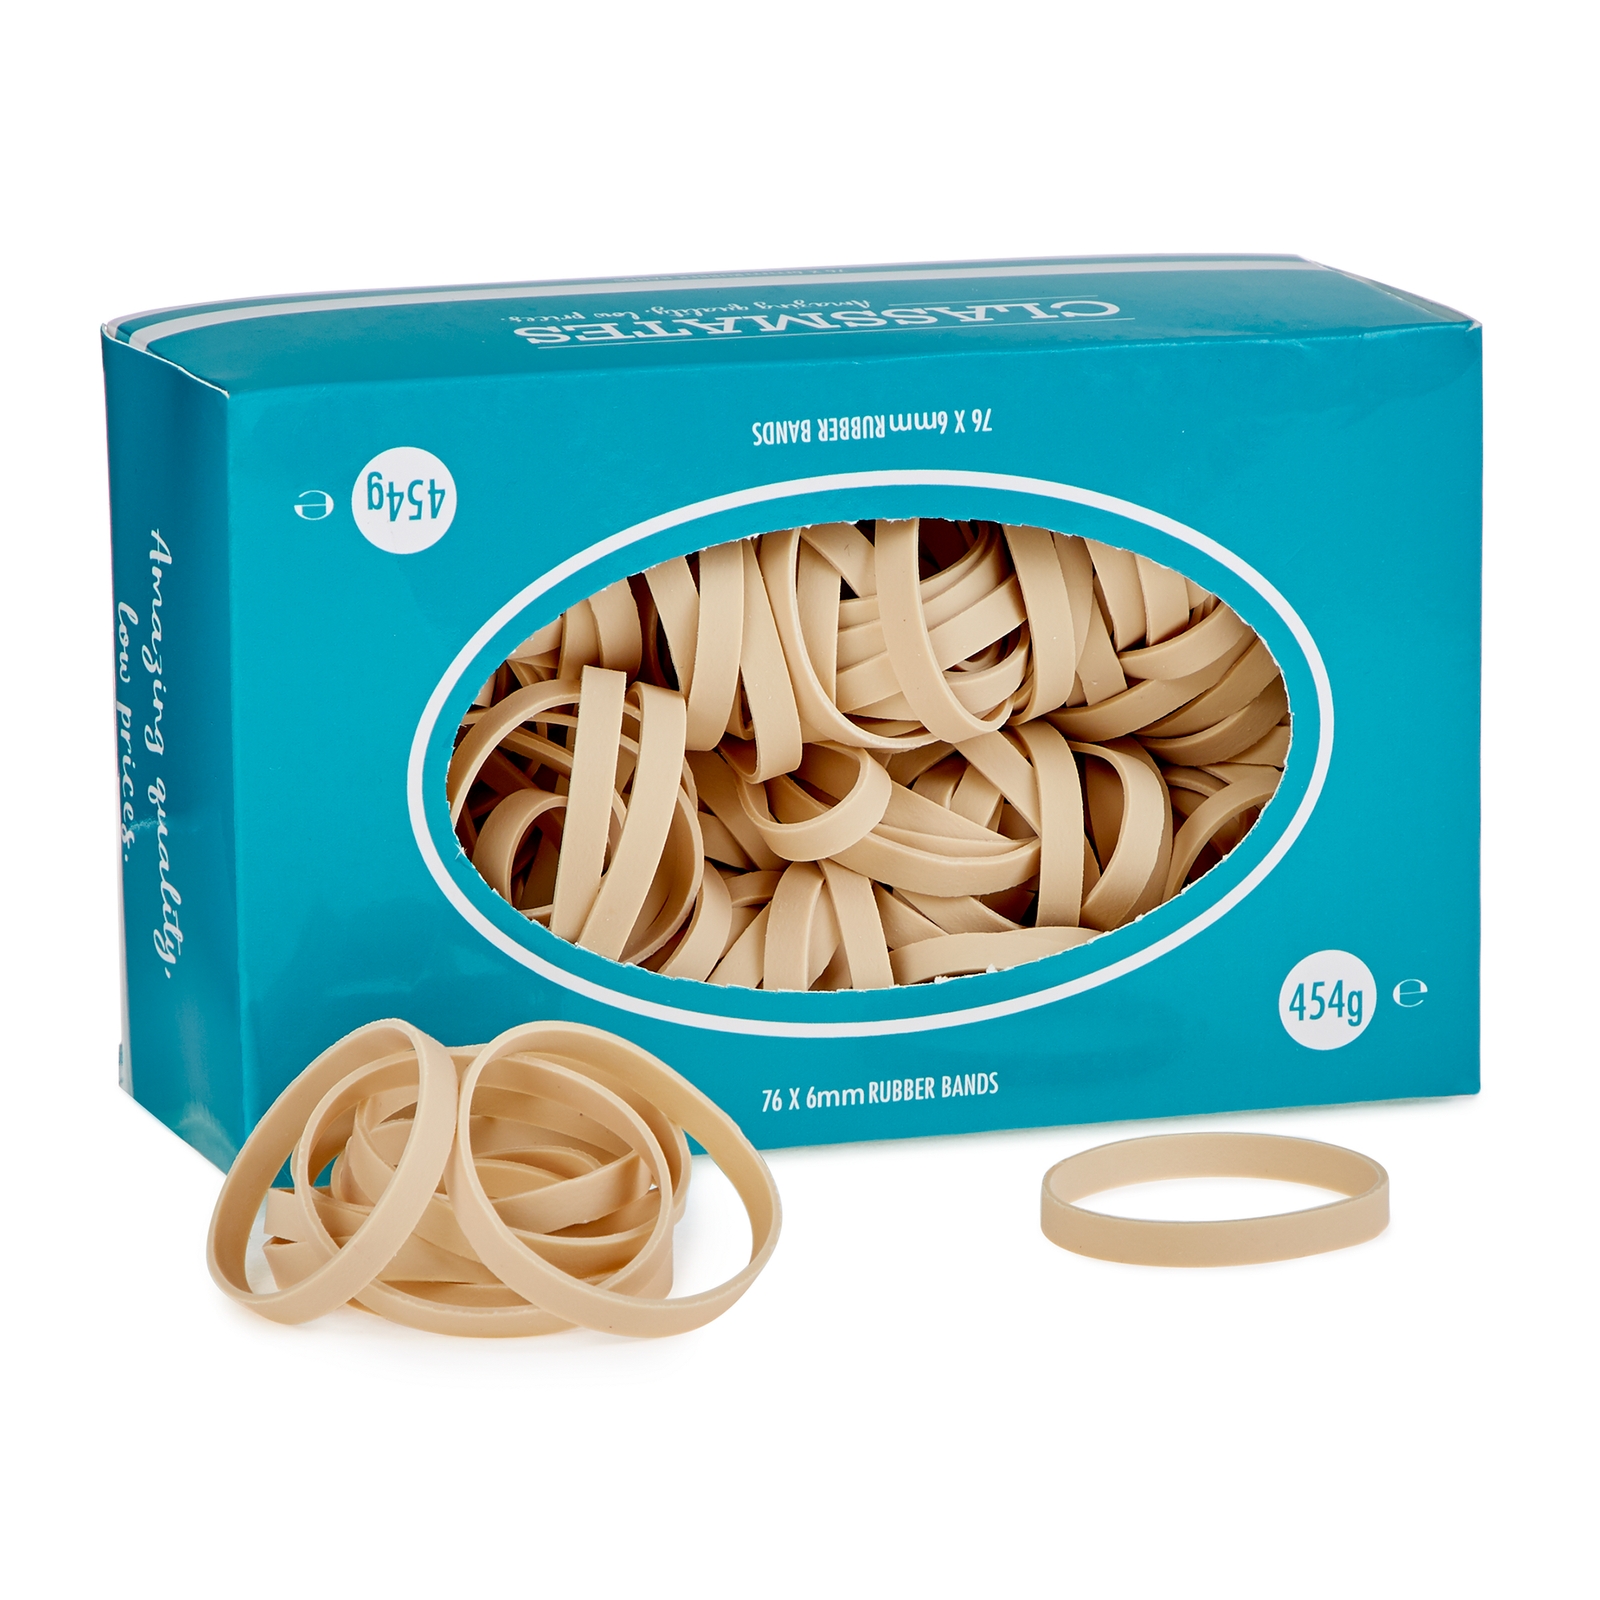 Classmates Rubber Bands 454g 76x6mm (Warning: May Contain Natural Rubber Latex)